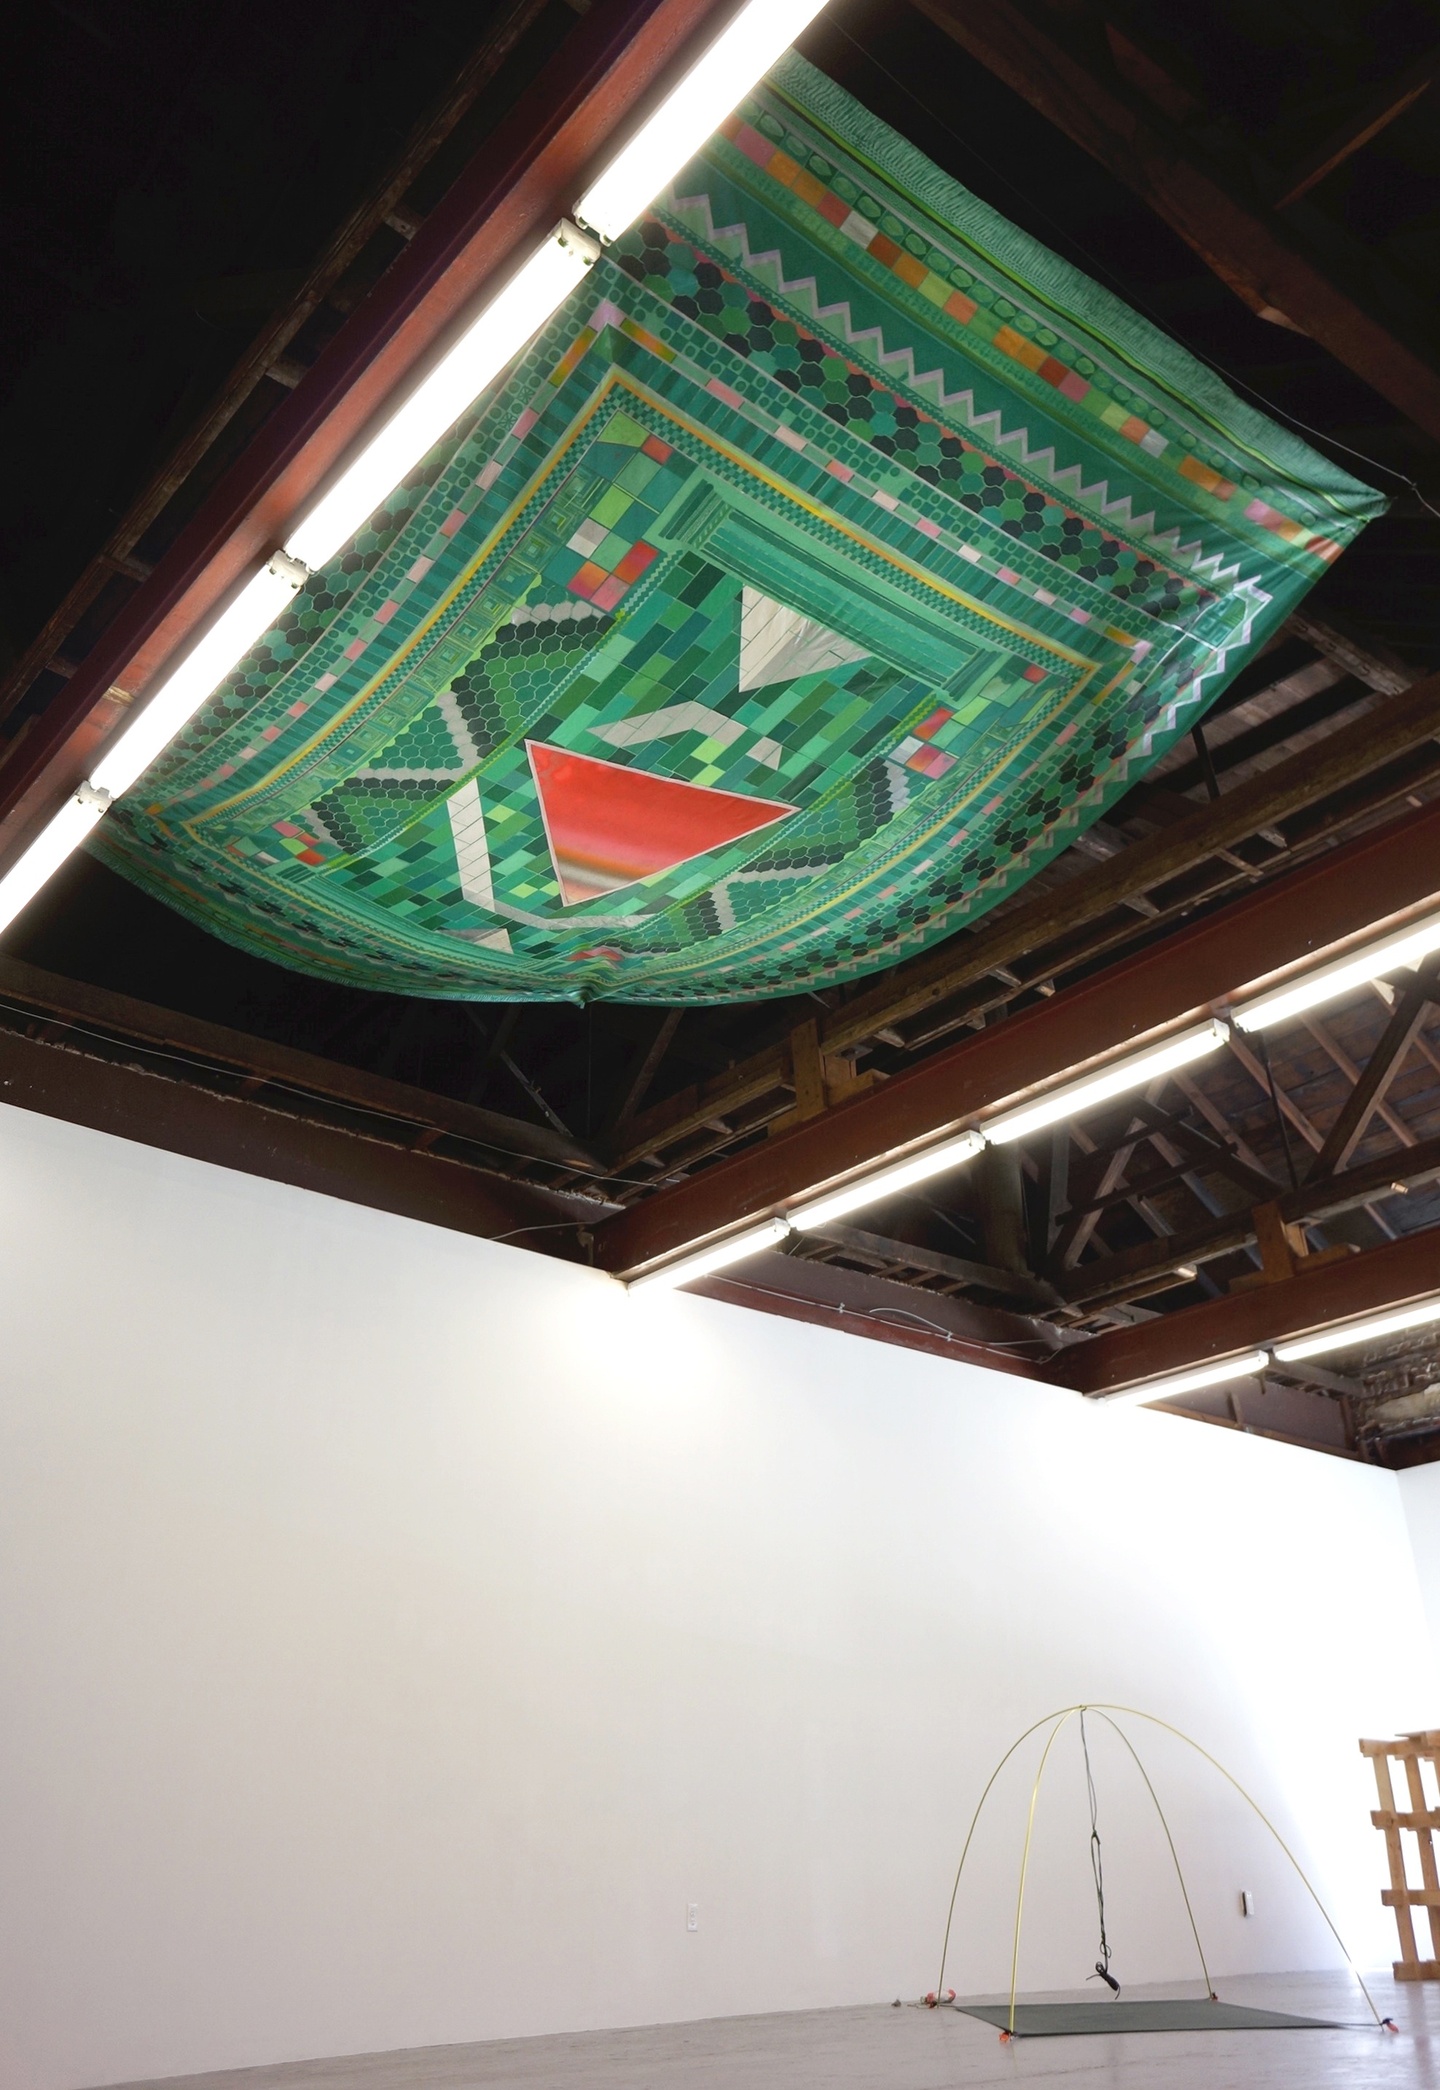 View of a textile hung above among the wooden rafters/joists of a ceiling; along these beams are fluorescent lights which illuminate the gallery space below — the walls are white and there is a wire sculpture below, on the ground in the distance. The textile up above is green and red with a geometric pattern, a (red) triangle in the center.